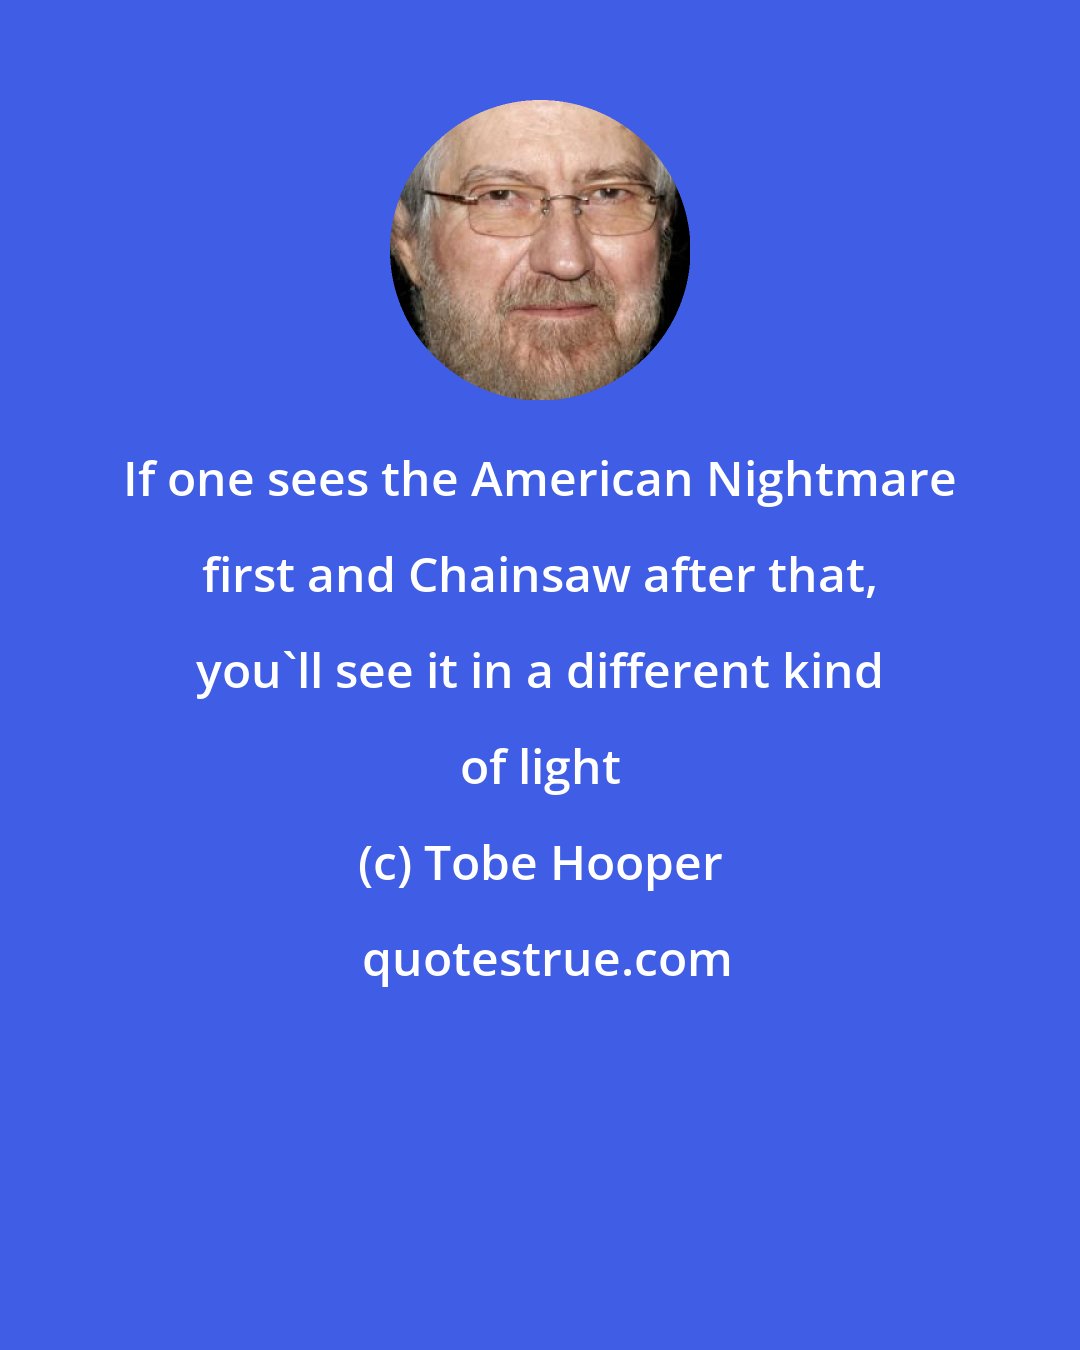 Tobe Hooper: If one sees the American Nightmare first and Chainsaw after that, you'll see it in a different kind of light